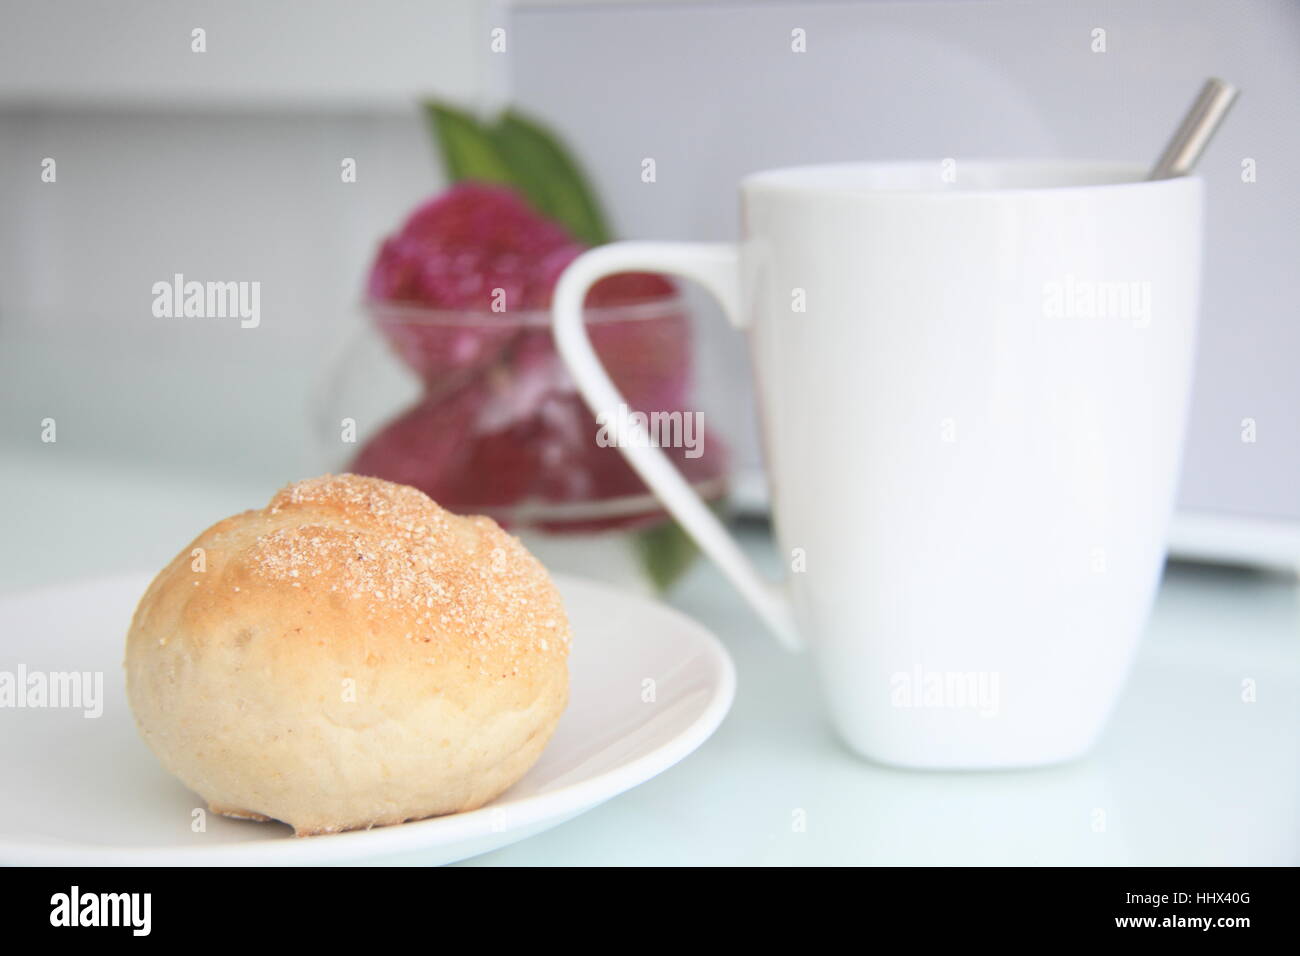 cup, bun, coffee, snack, flower, orchid, plant, white, break, rest, pause, Stock Photo